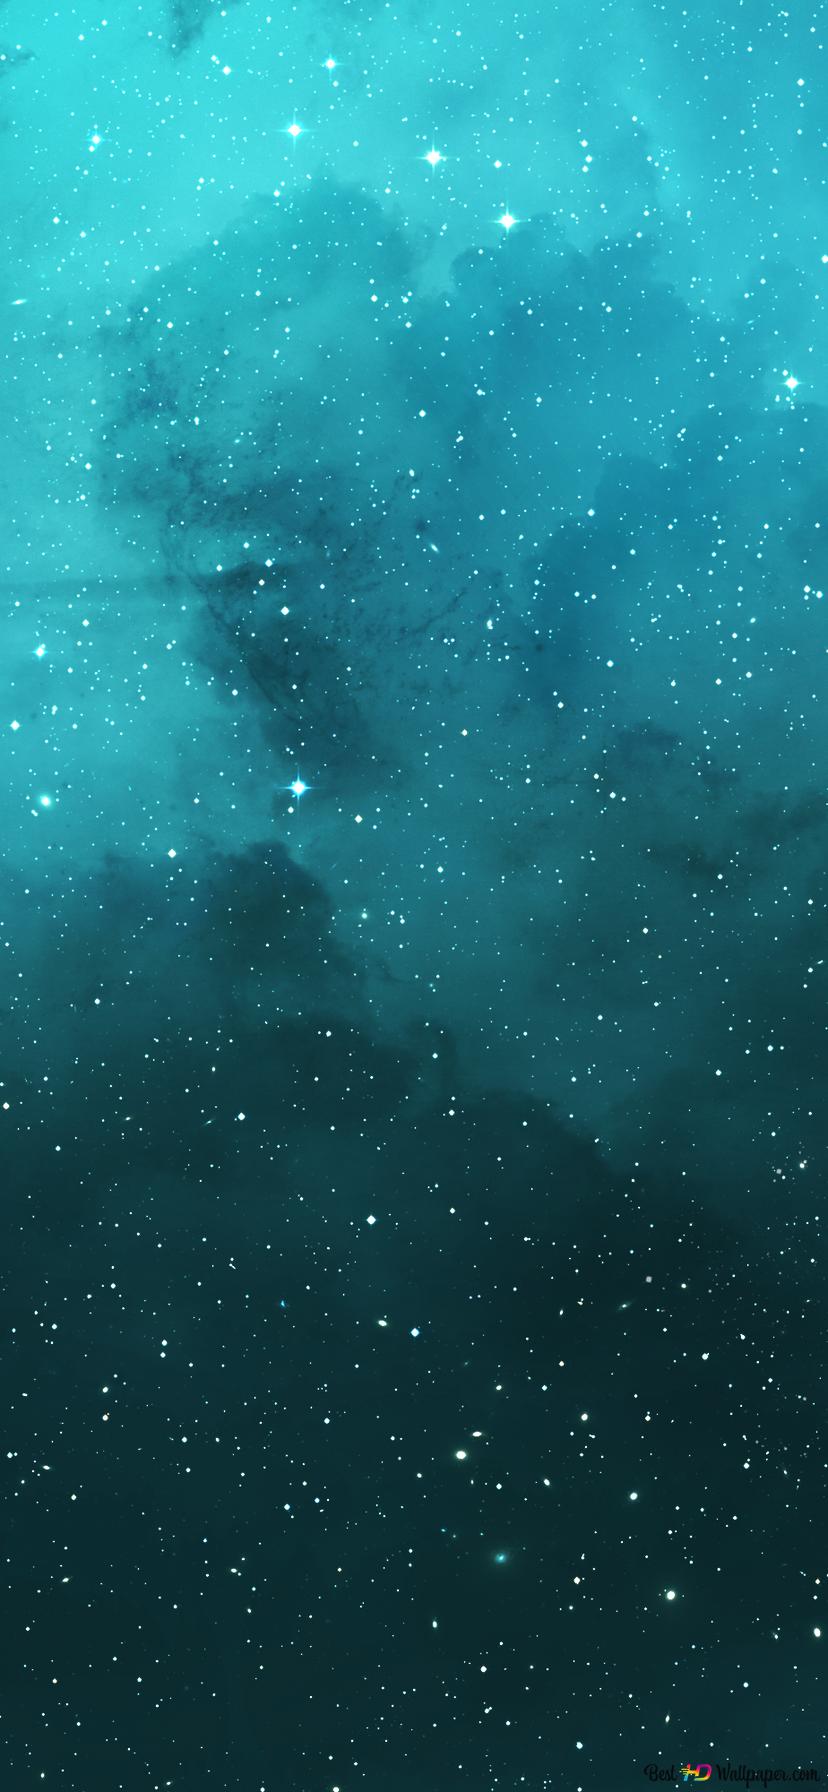 Teal wallpaper with stars for your iPhone 8 from Everpix - Cyan